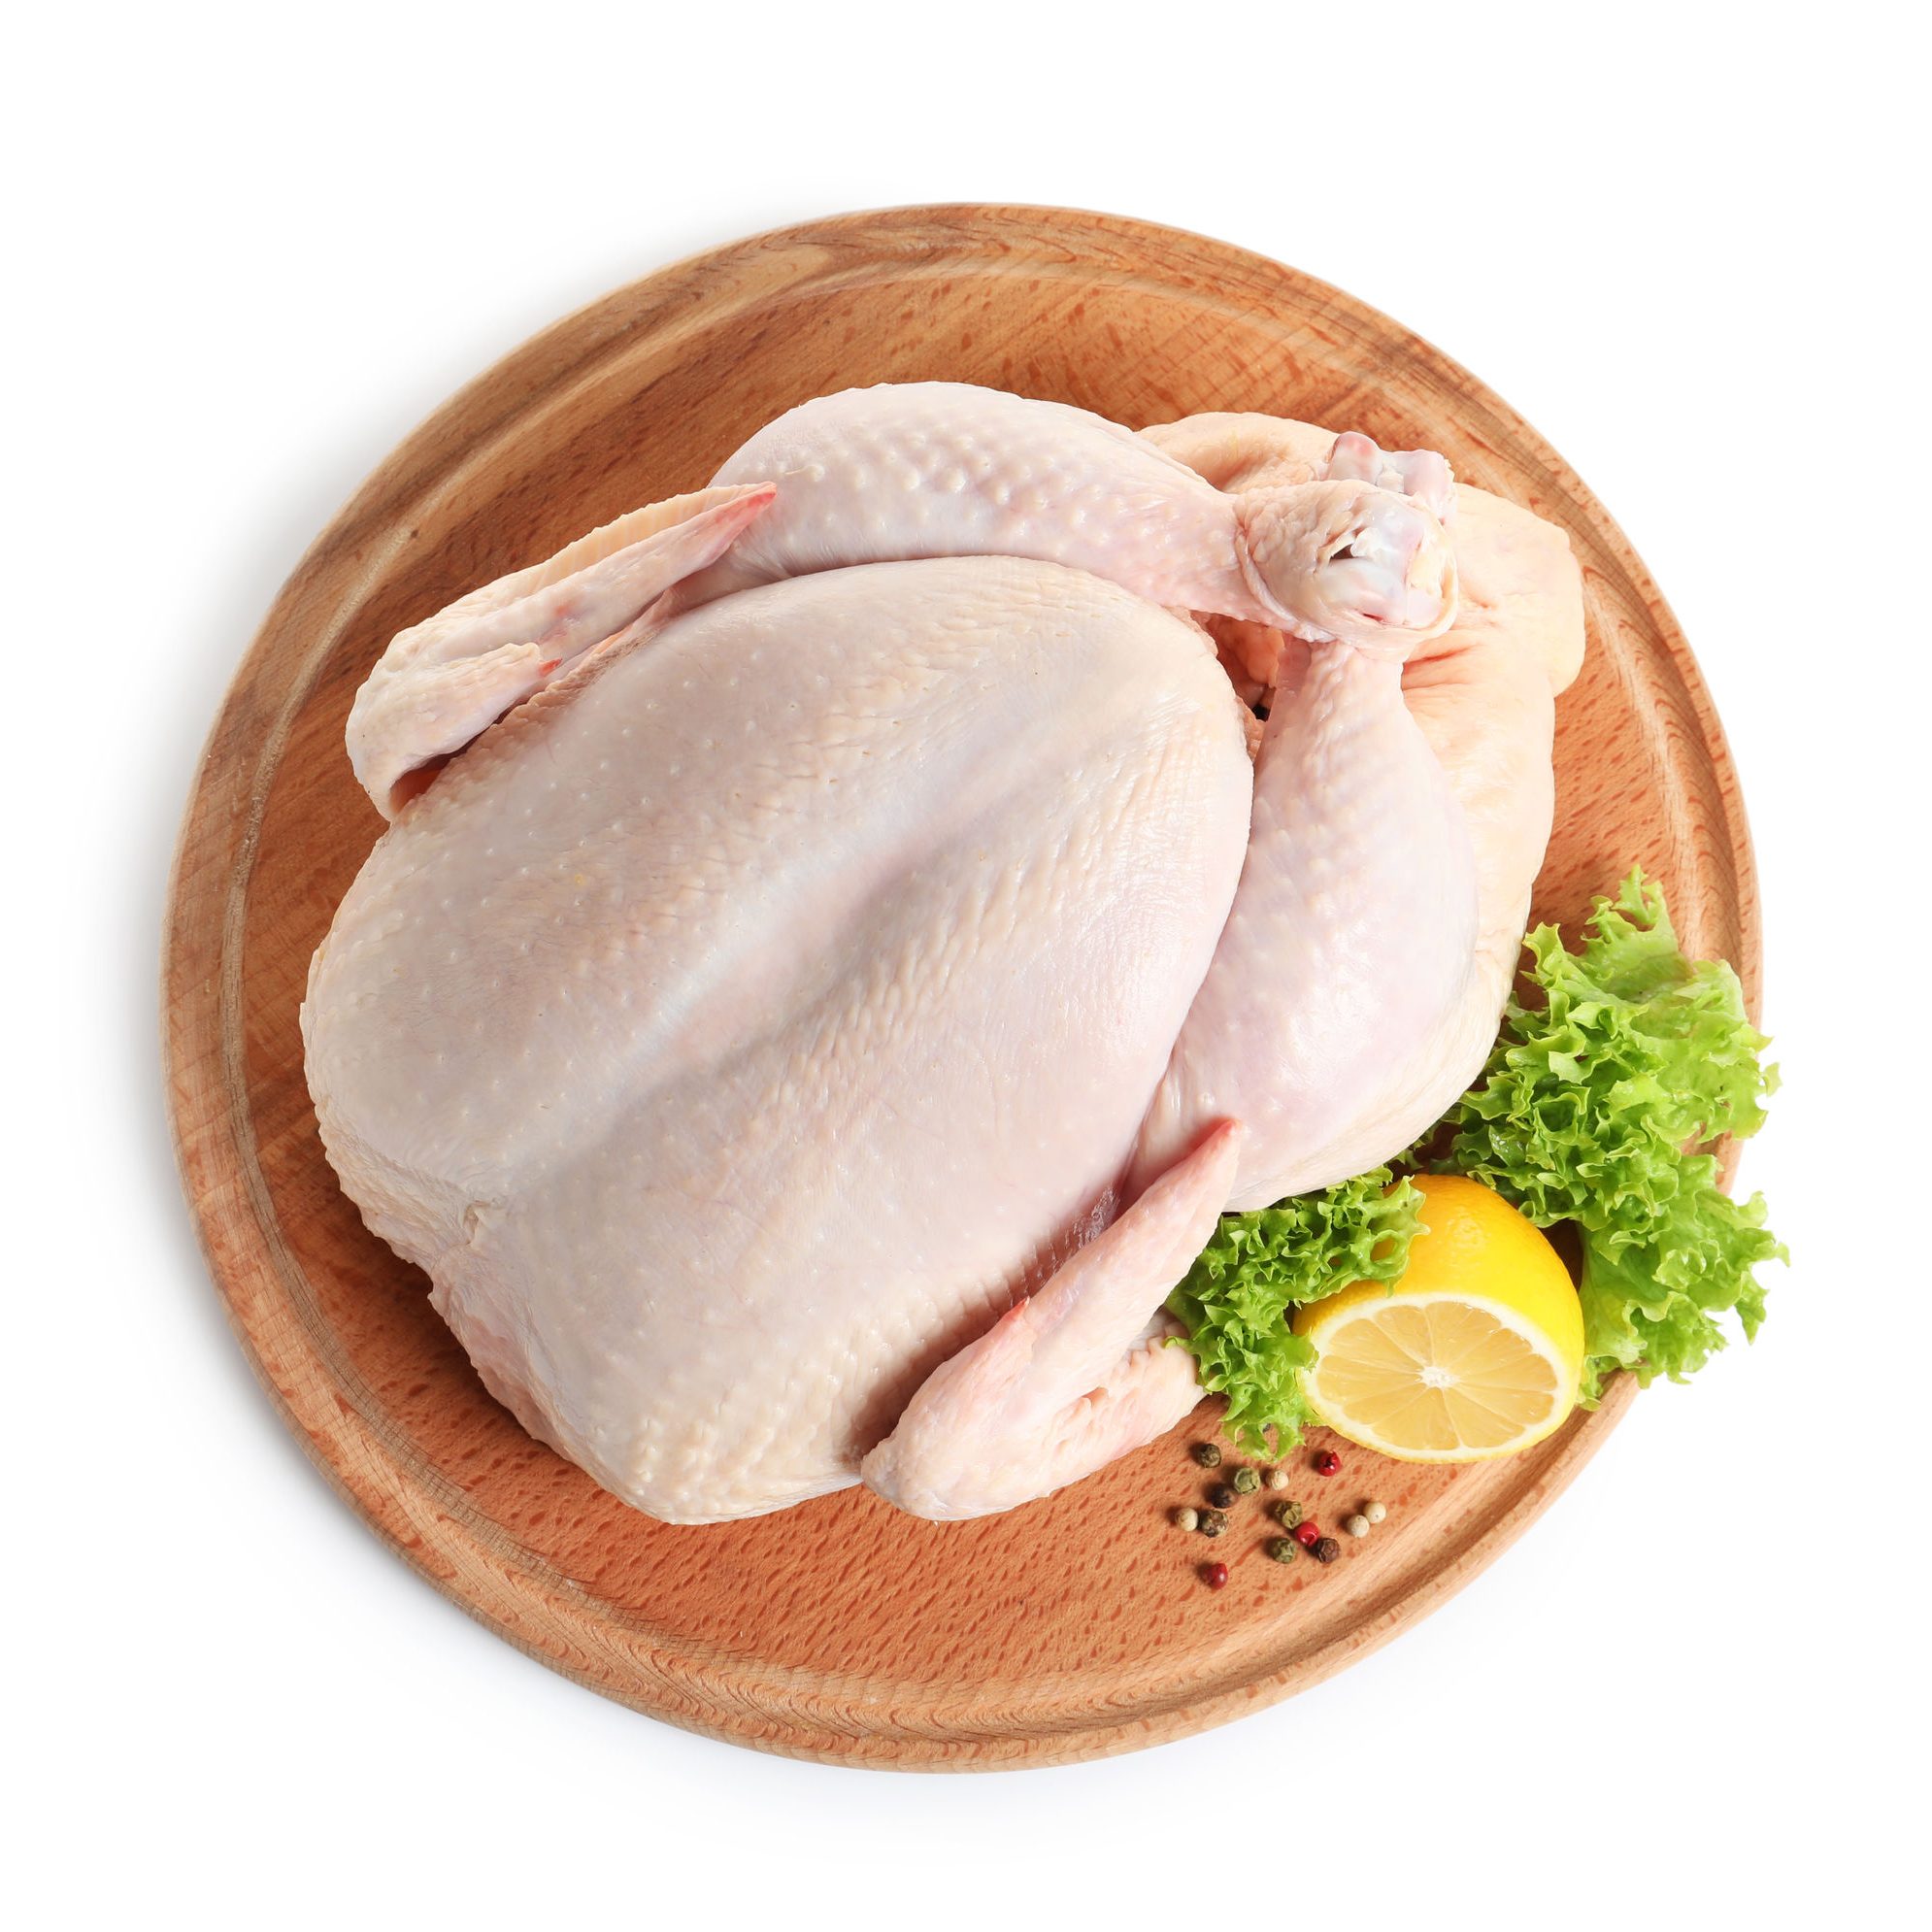 Wooden board with raw turkey and ingredients on white background, top view